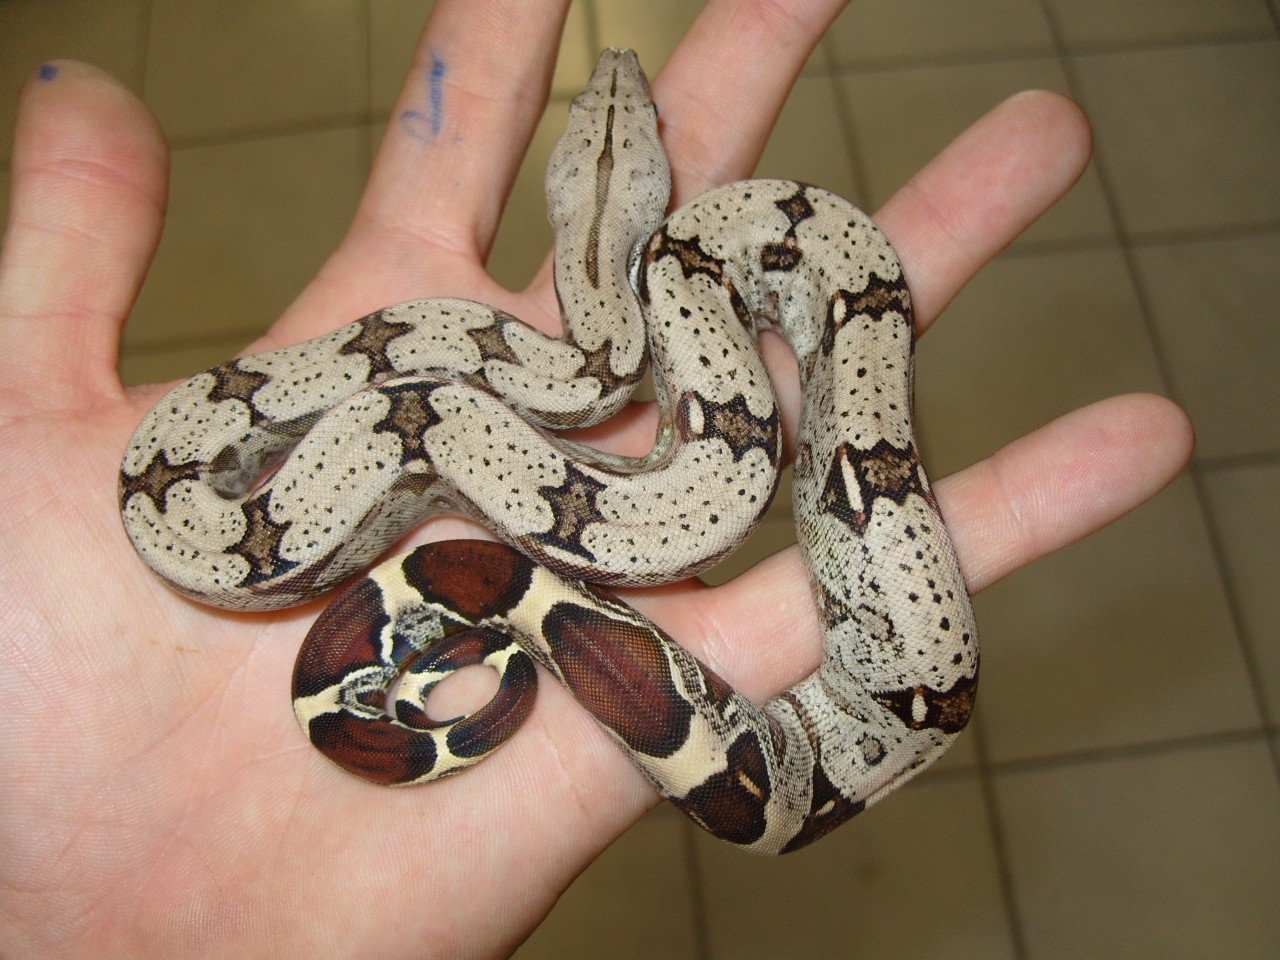 Suriname Red Tail Boas for sale